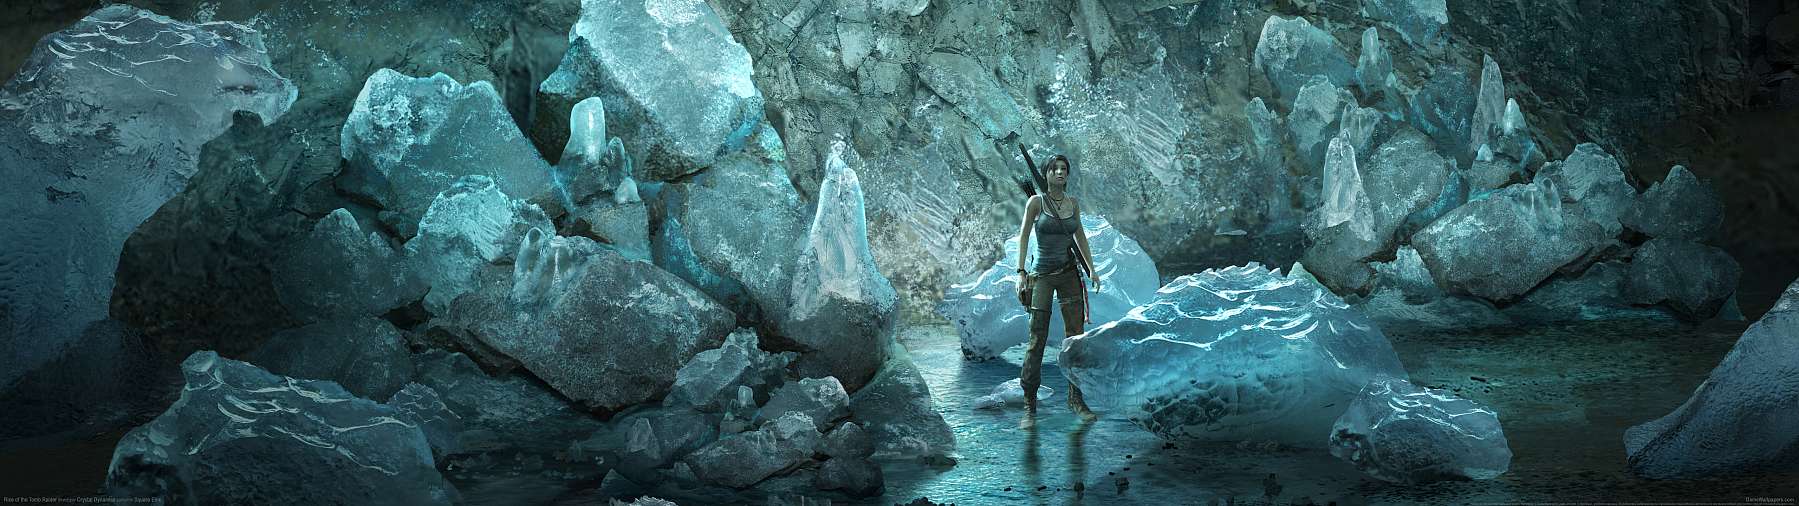 Rise of the Tomb Raider wallpaper or background